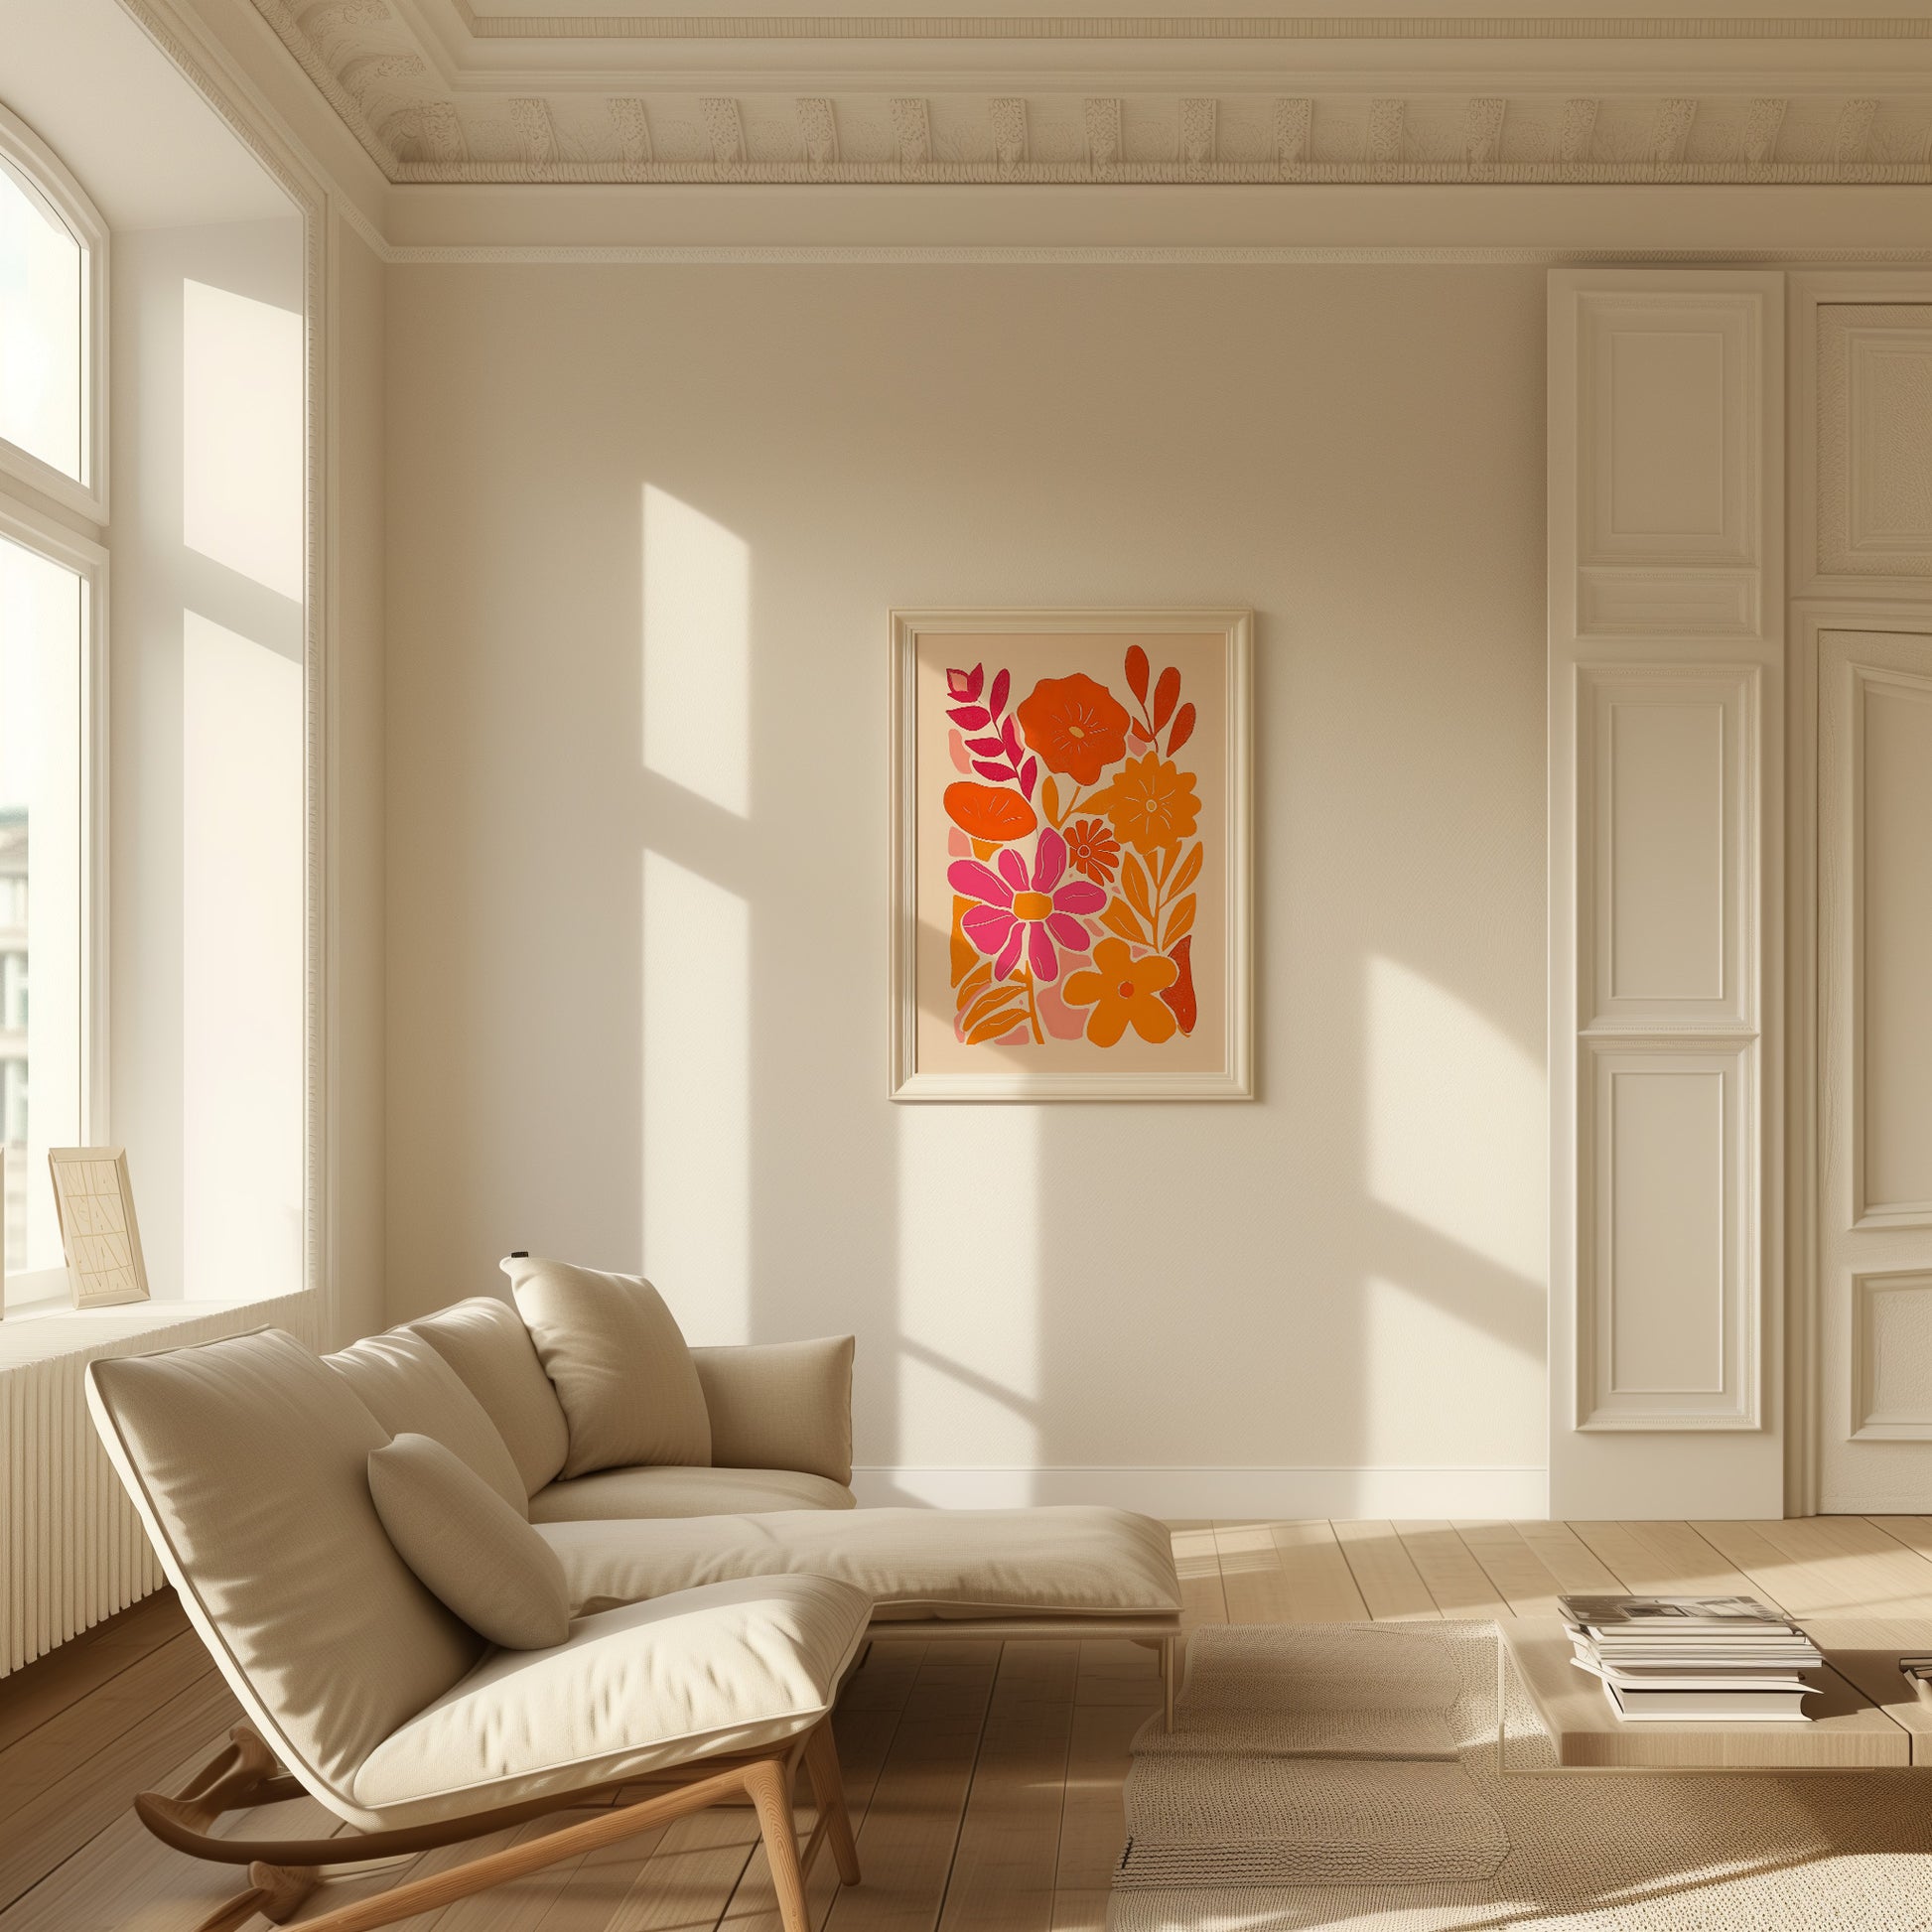 A cozy room with a couch and a colorful floral painting on the wall.